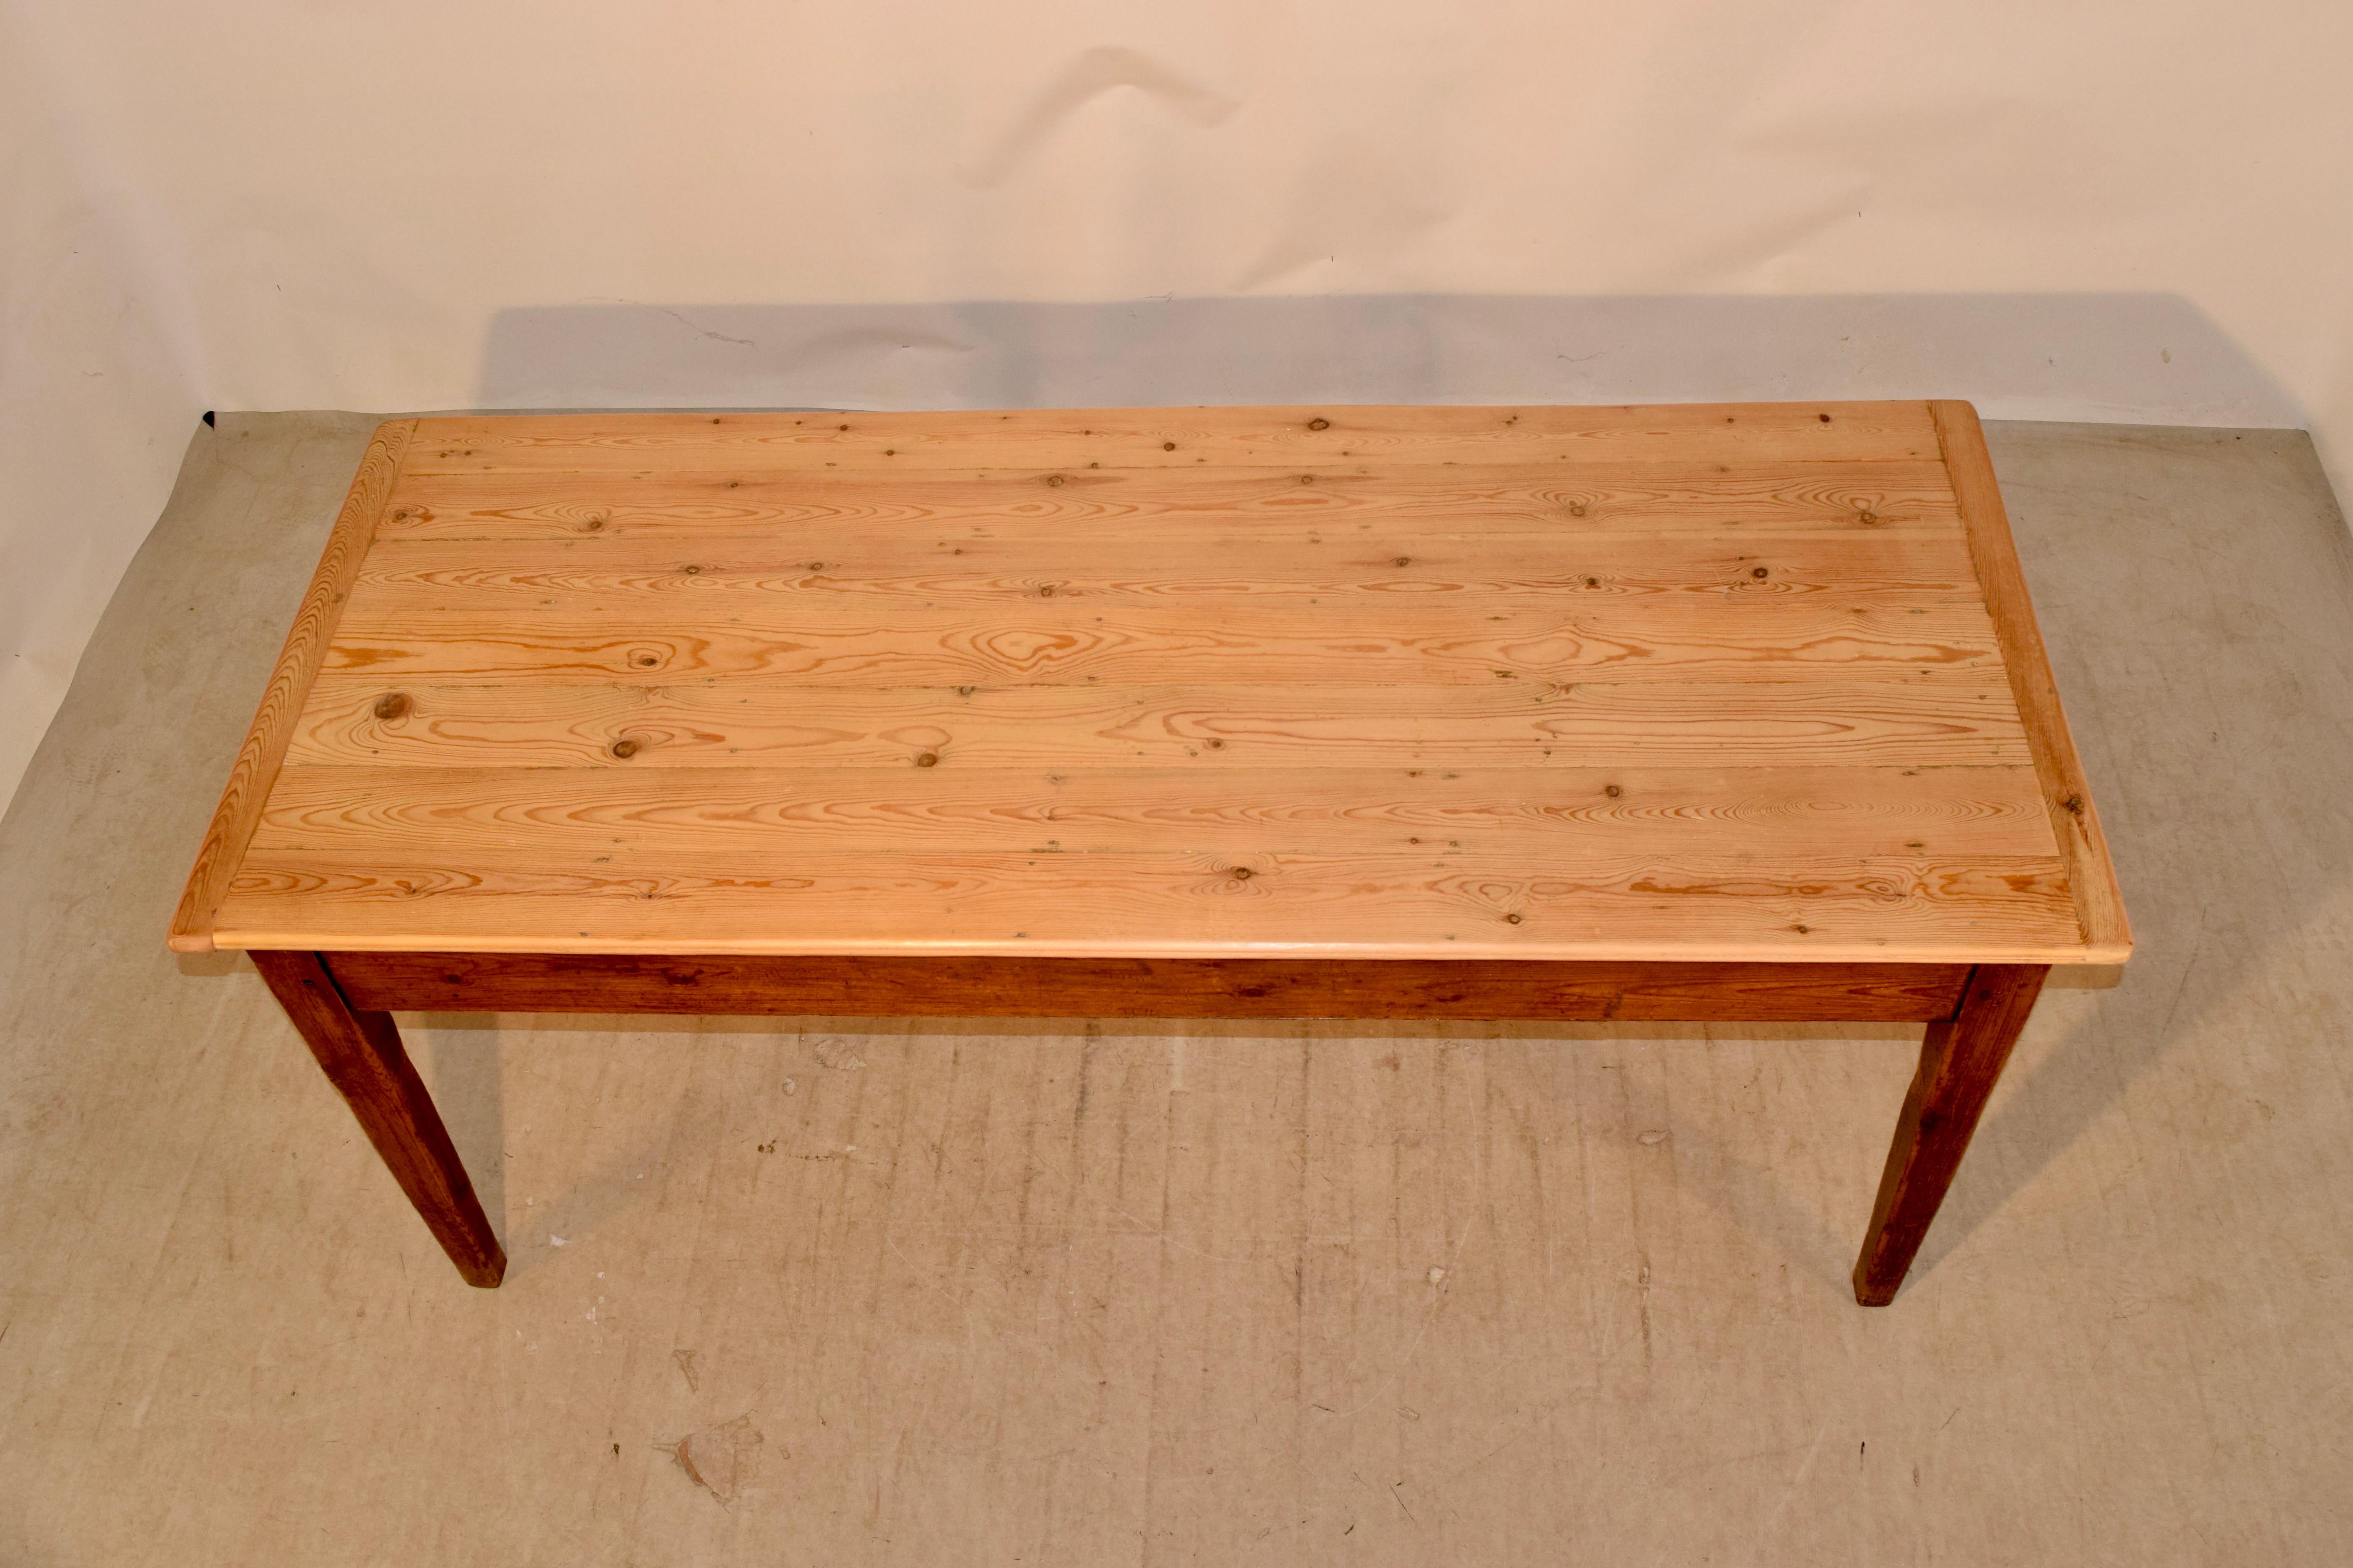 19th Century French farm table with a scrubbed plank top which has banded ends. The top is supported on a pitch pine base with tapered legs. Simple and elegant. The apron measures 23.5 inches in height.